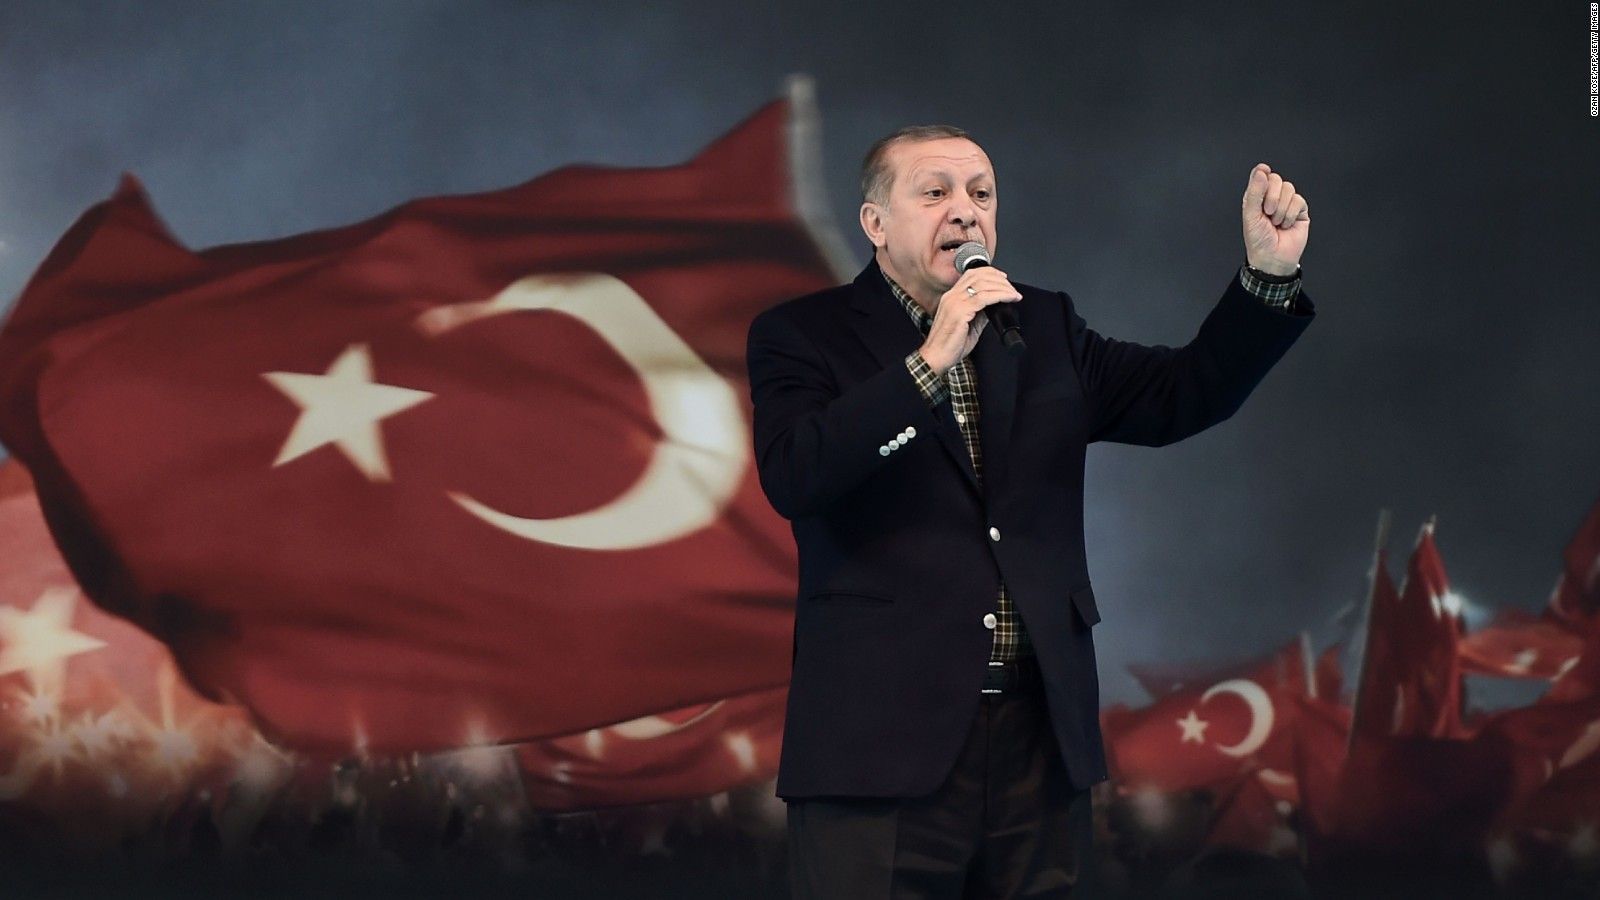 US govt 'strongly objects' to Turkish President Erdogan hosting Hamas leaders